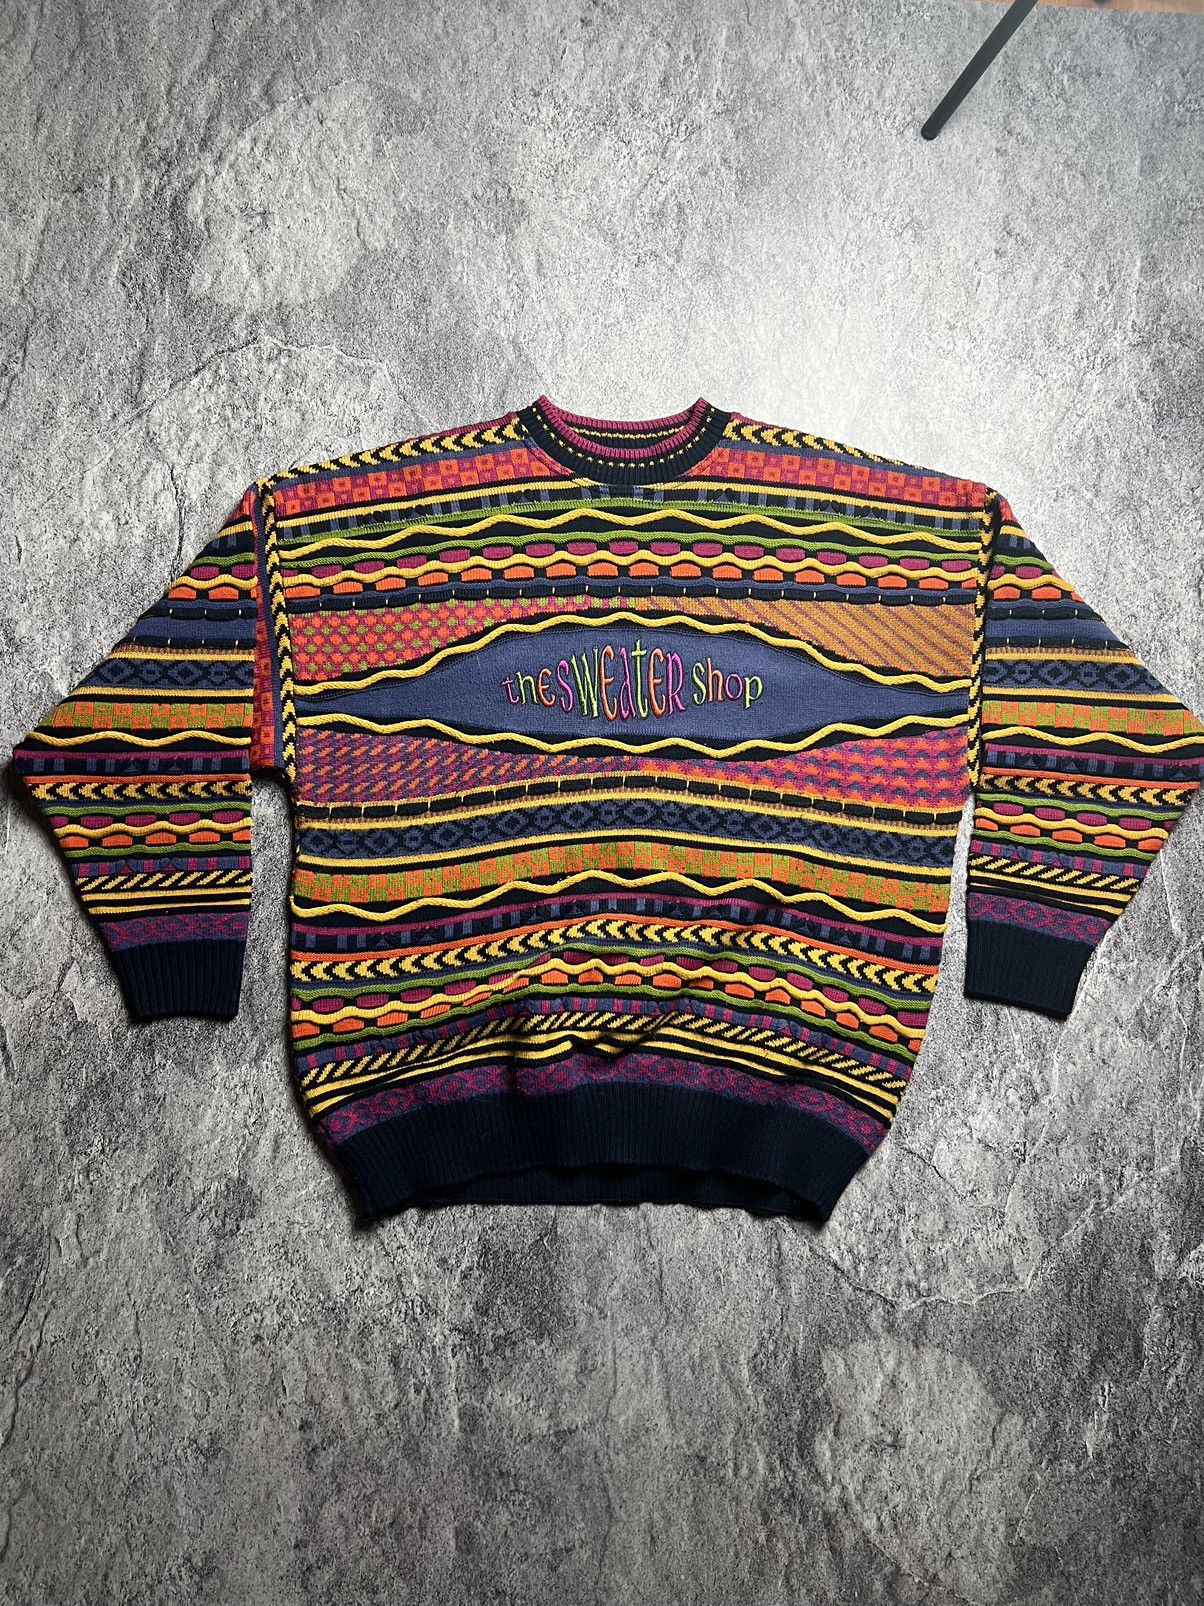 Pre-owned Rap Tees X Vintage Coogi Japan Archival Multicolor Style Knit Sweater